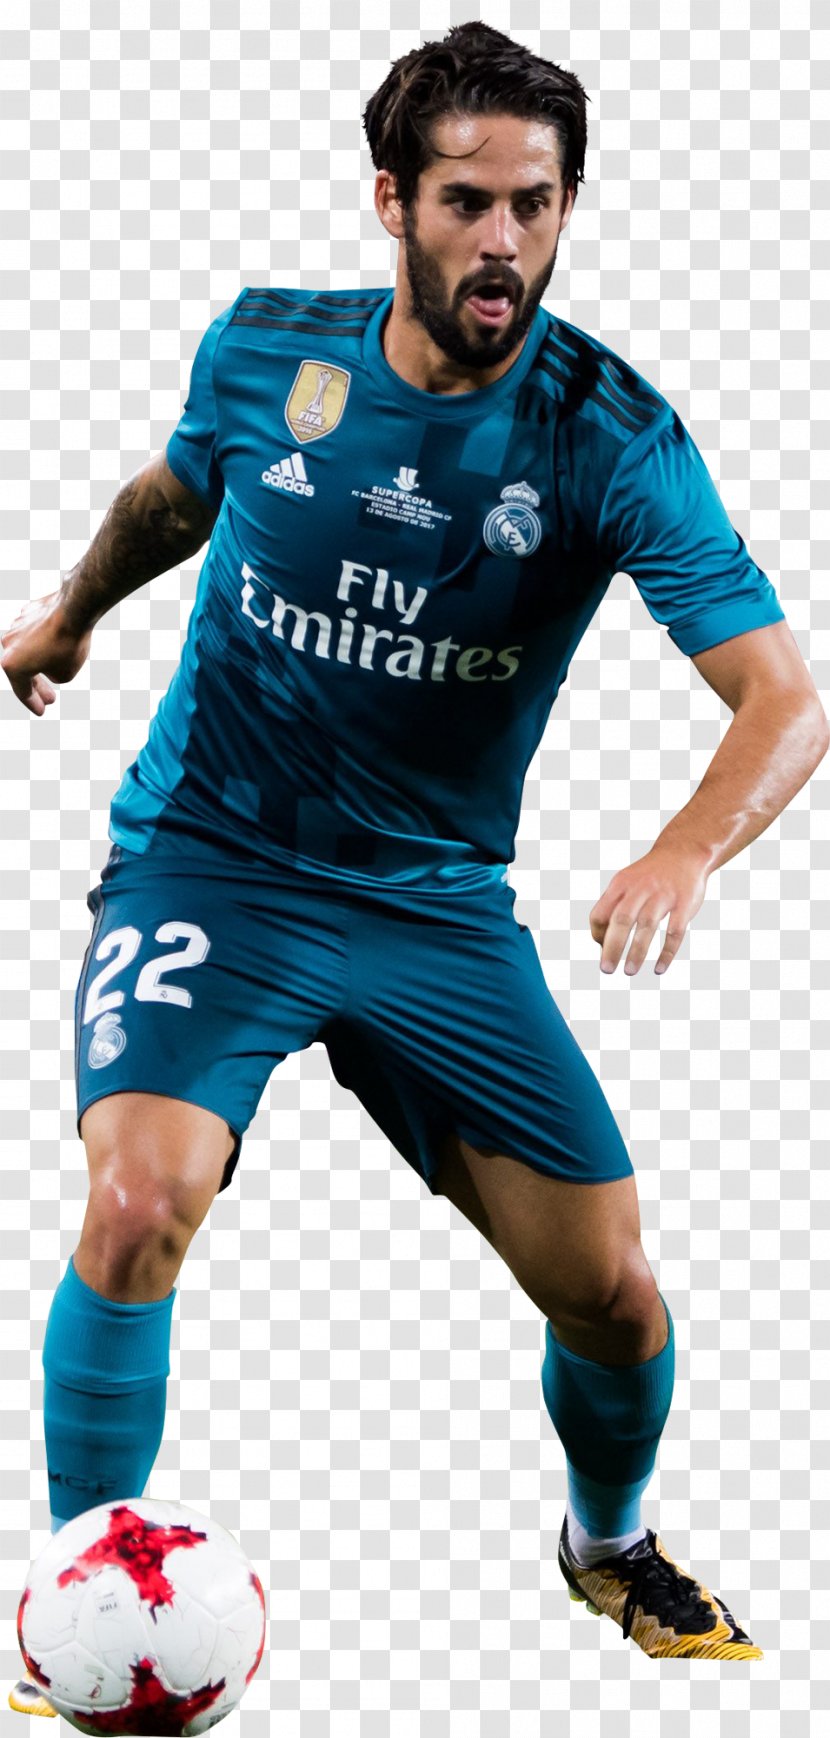 Isco Real Madrid C.F. Jersey Sport Football Player Transparent PNG